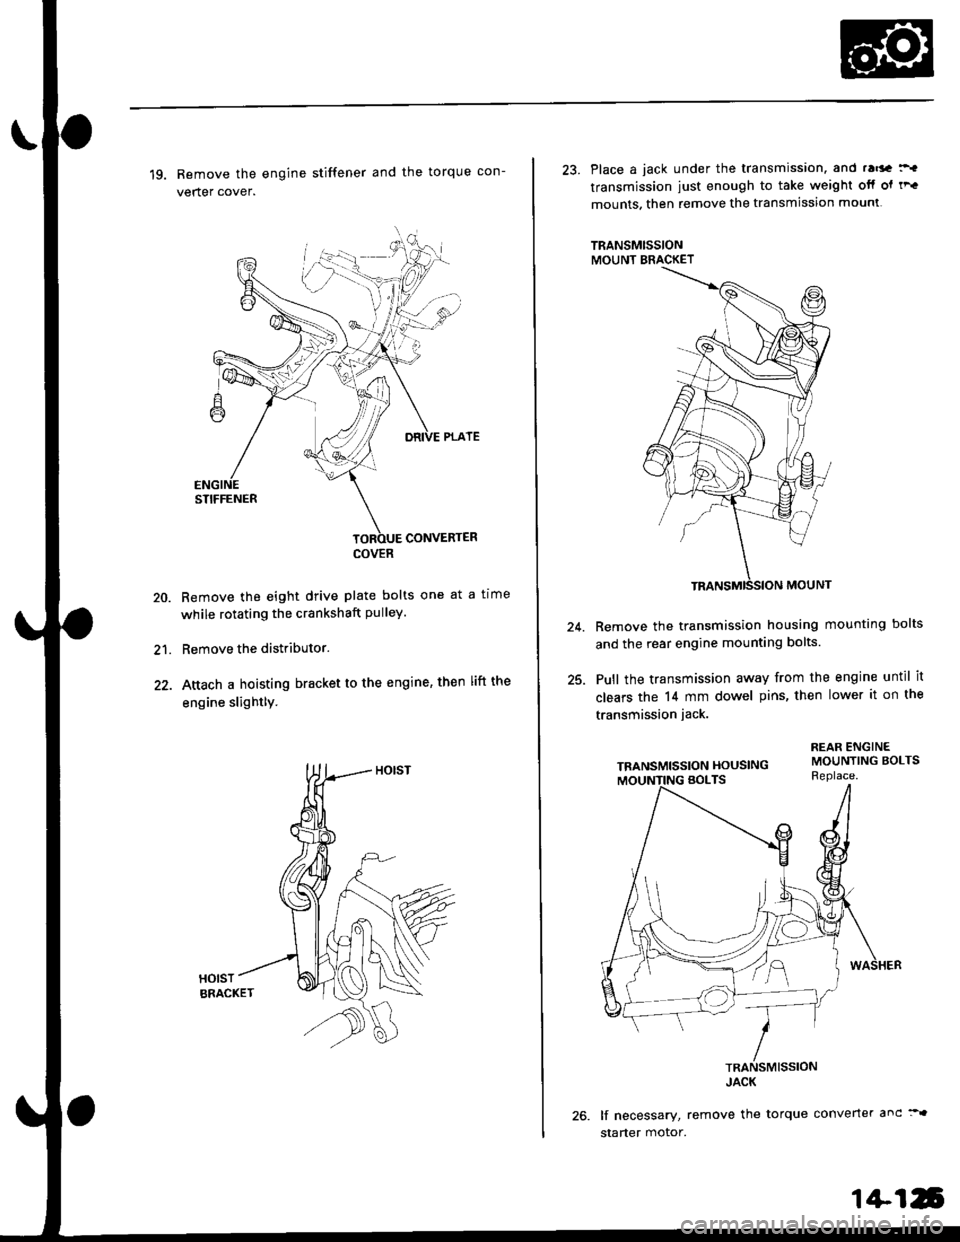 HONDA CIVIC 1999 6.G Workshop Manual 19. Remove the engine stiffener and the torque con-
verter cover.
Remove the eight drive plate bolts one at a tlme
while rotating the crankshaft pulley.
Remove the distributor.
Attach a hoisting brack